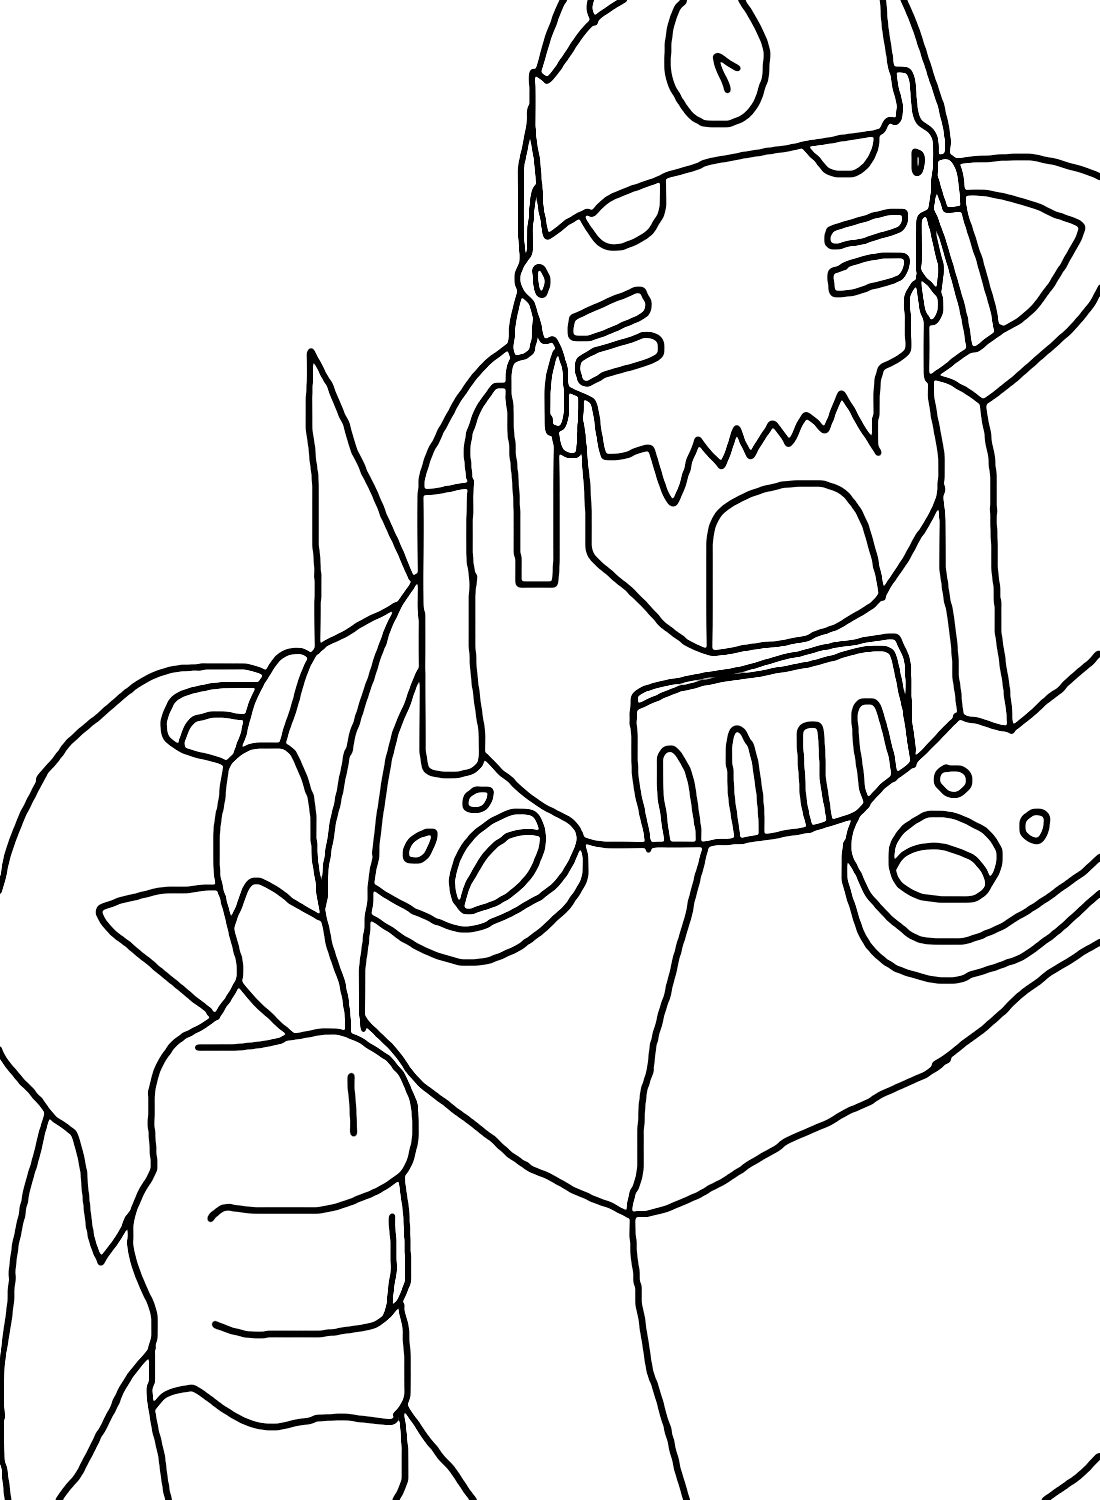 Free Alphonse Elric Coloring Page from Alphonse Elric